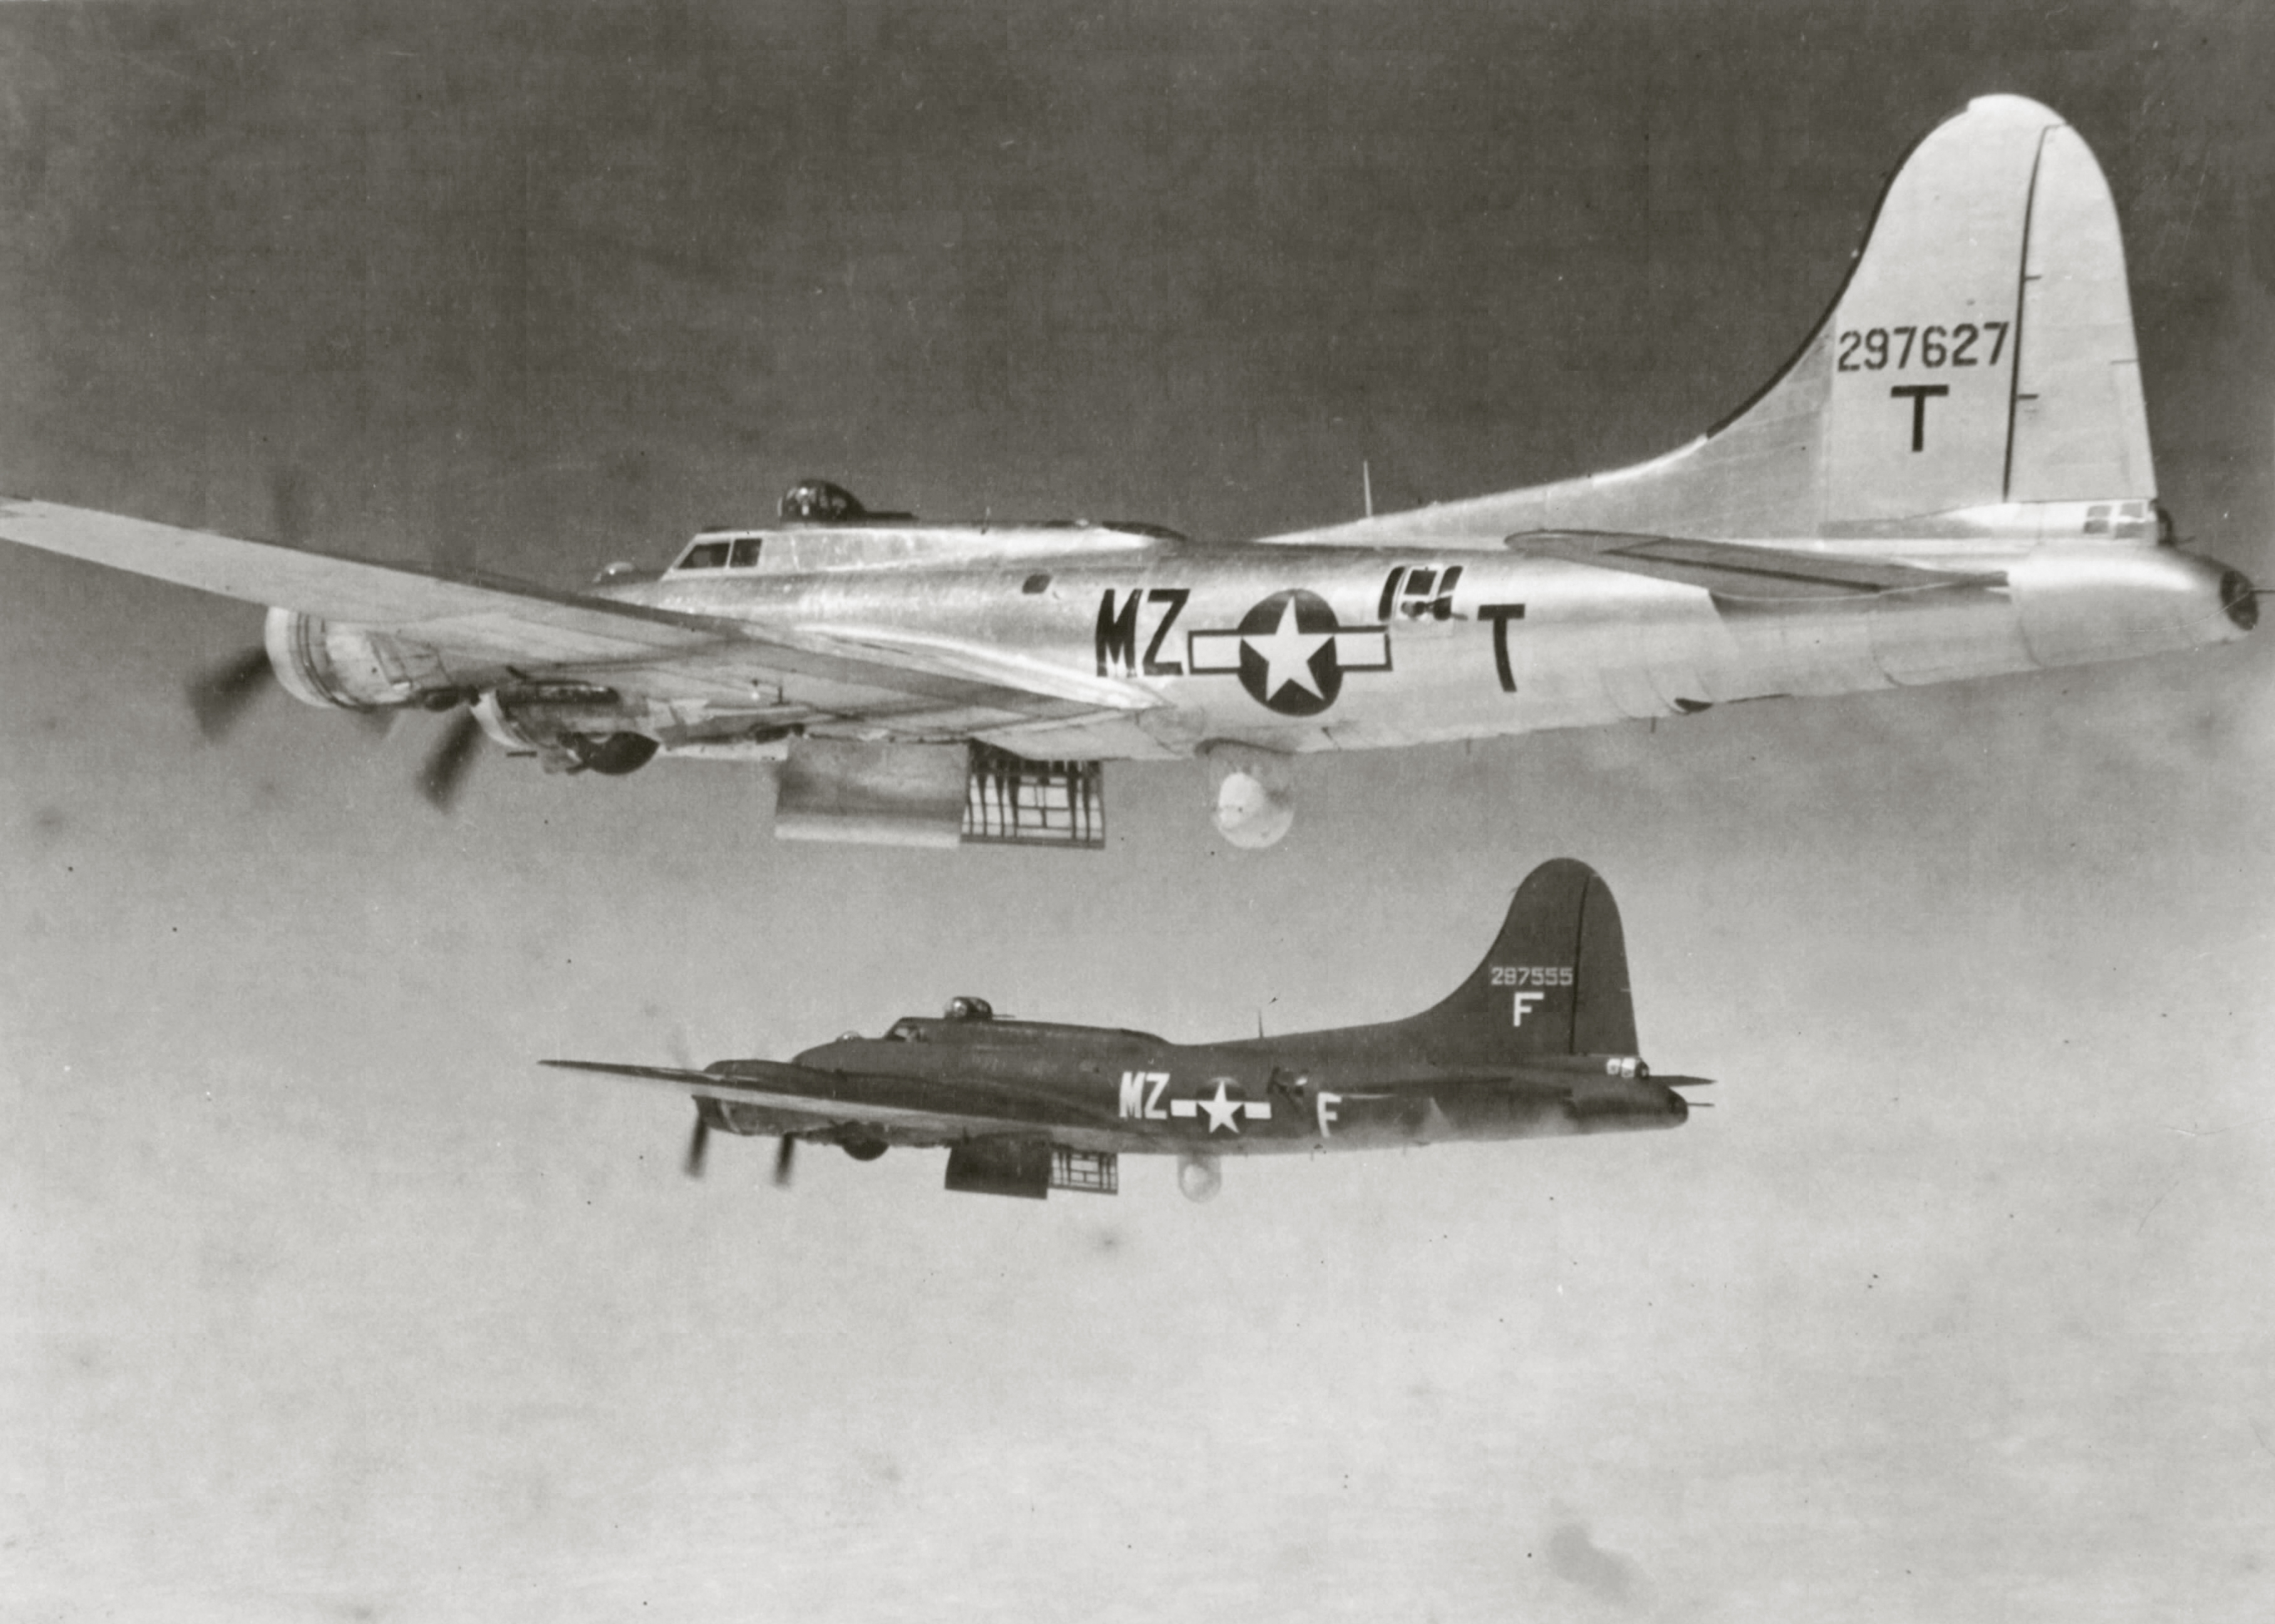 Asisbiz 42 97627 B-17G Fortress 8AF 96BG413BS MZT was a Mickey ship in  formation with MZF 01